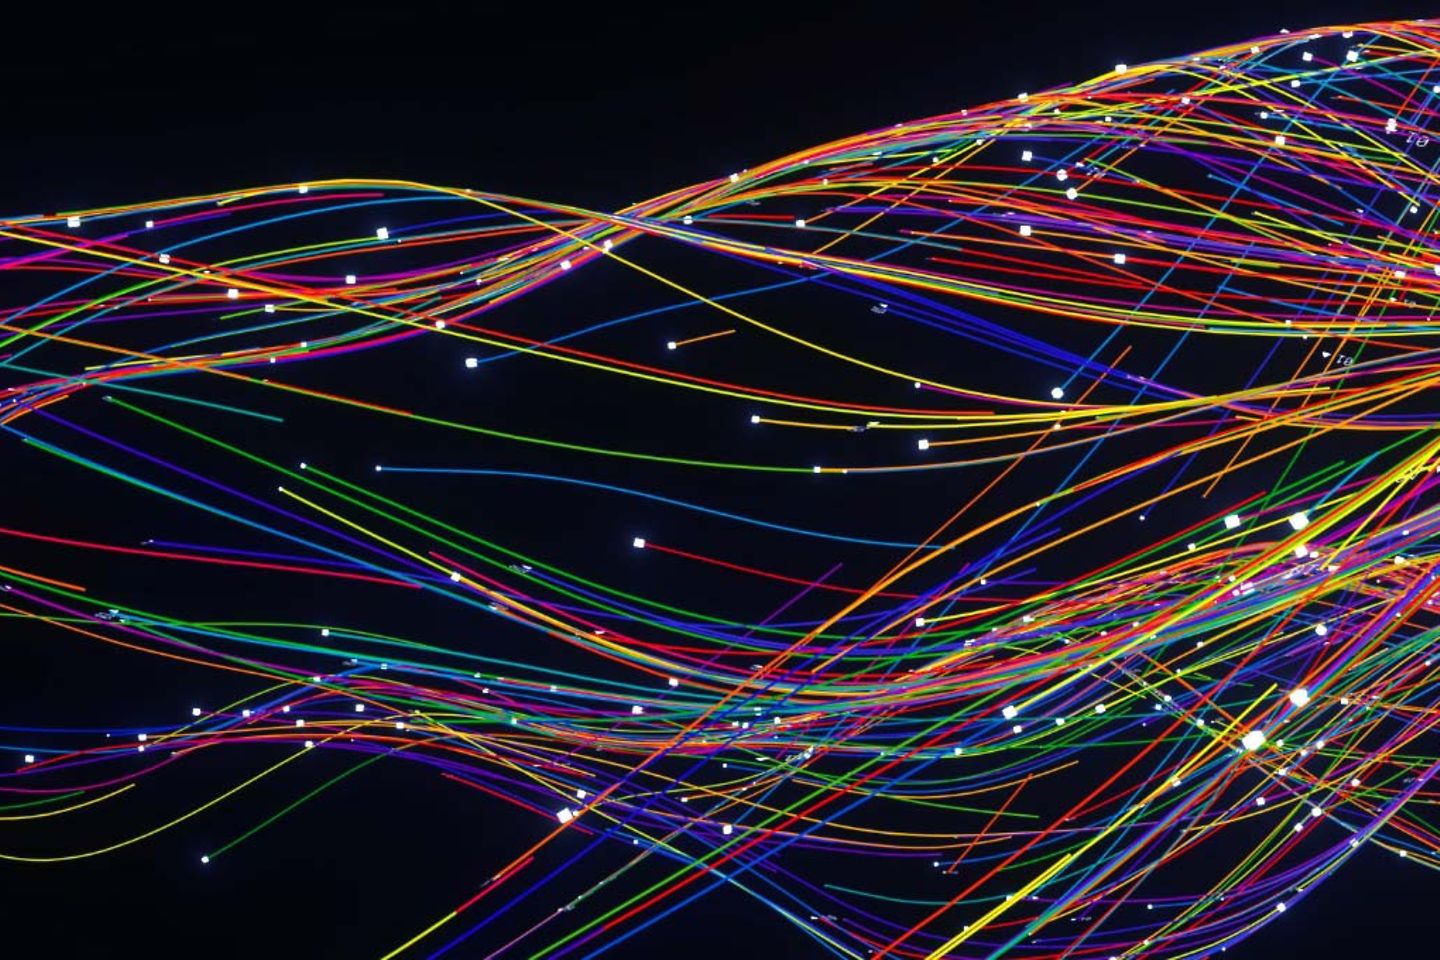 Abstract flowing data made out of numbers and glowing turbulent multi coloured splines on black background.